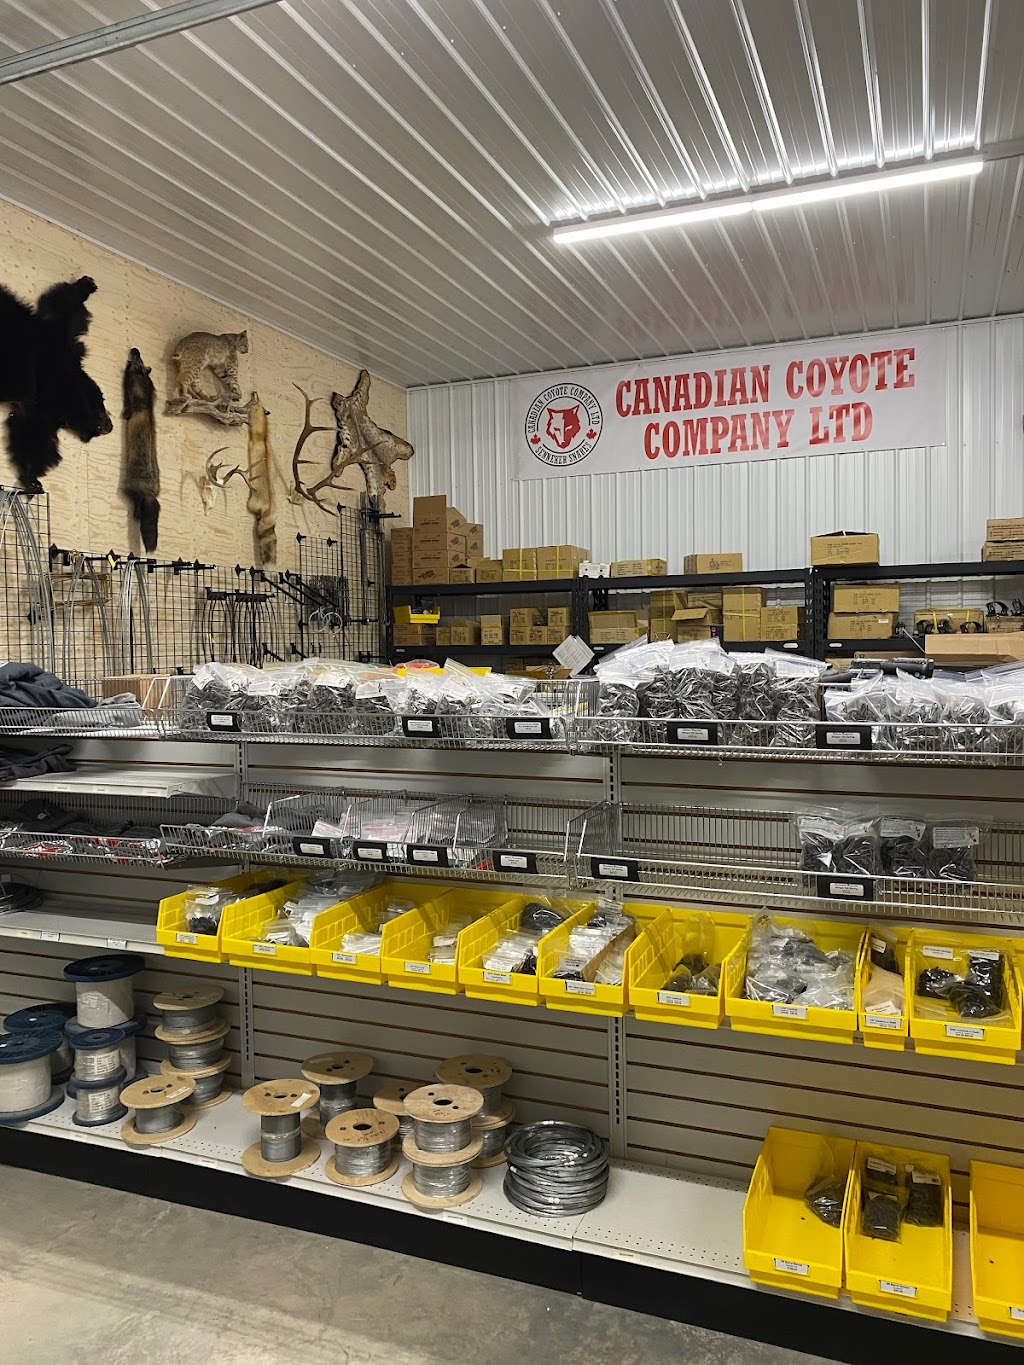 Canadian Coyote Company Ltd. | store | 132044, Range Rd 163, Vauxhall, AB T0K 2K0, Canada | 4037252283 OR +1 403-725-2283